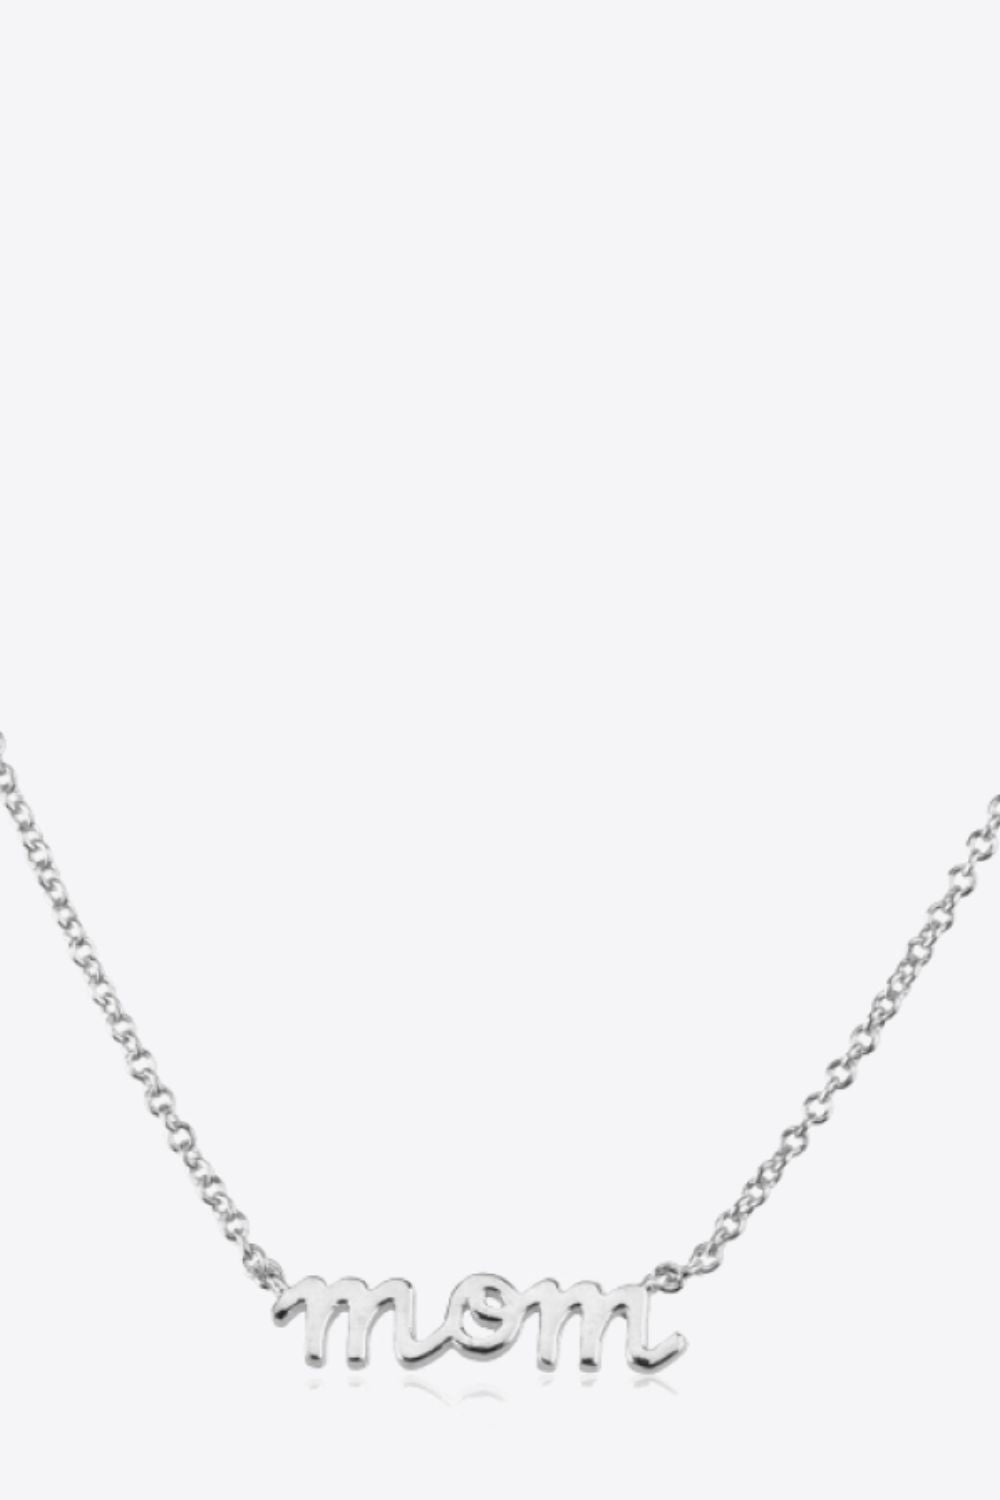 - MOM 925 Sterling Silver Necklace - 2 colors - necklace at TFC&H Co.